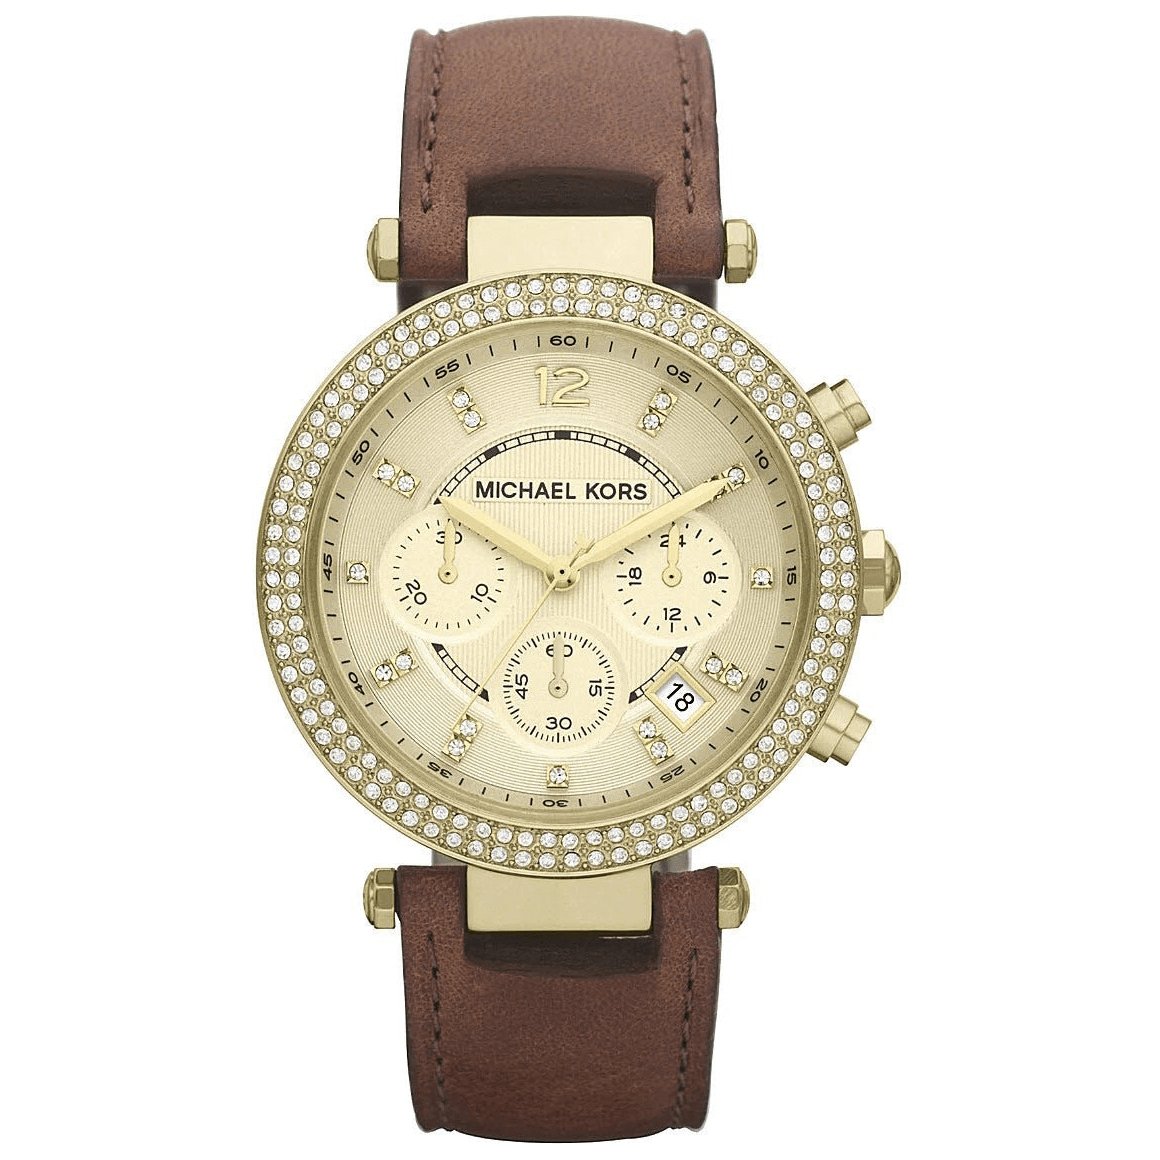 Michael Kors Women White leather Croc watch7201412471  The Gold Source  Jewelry Store